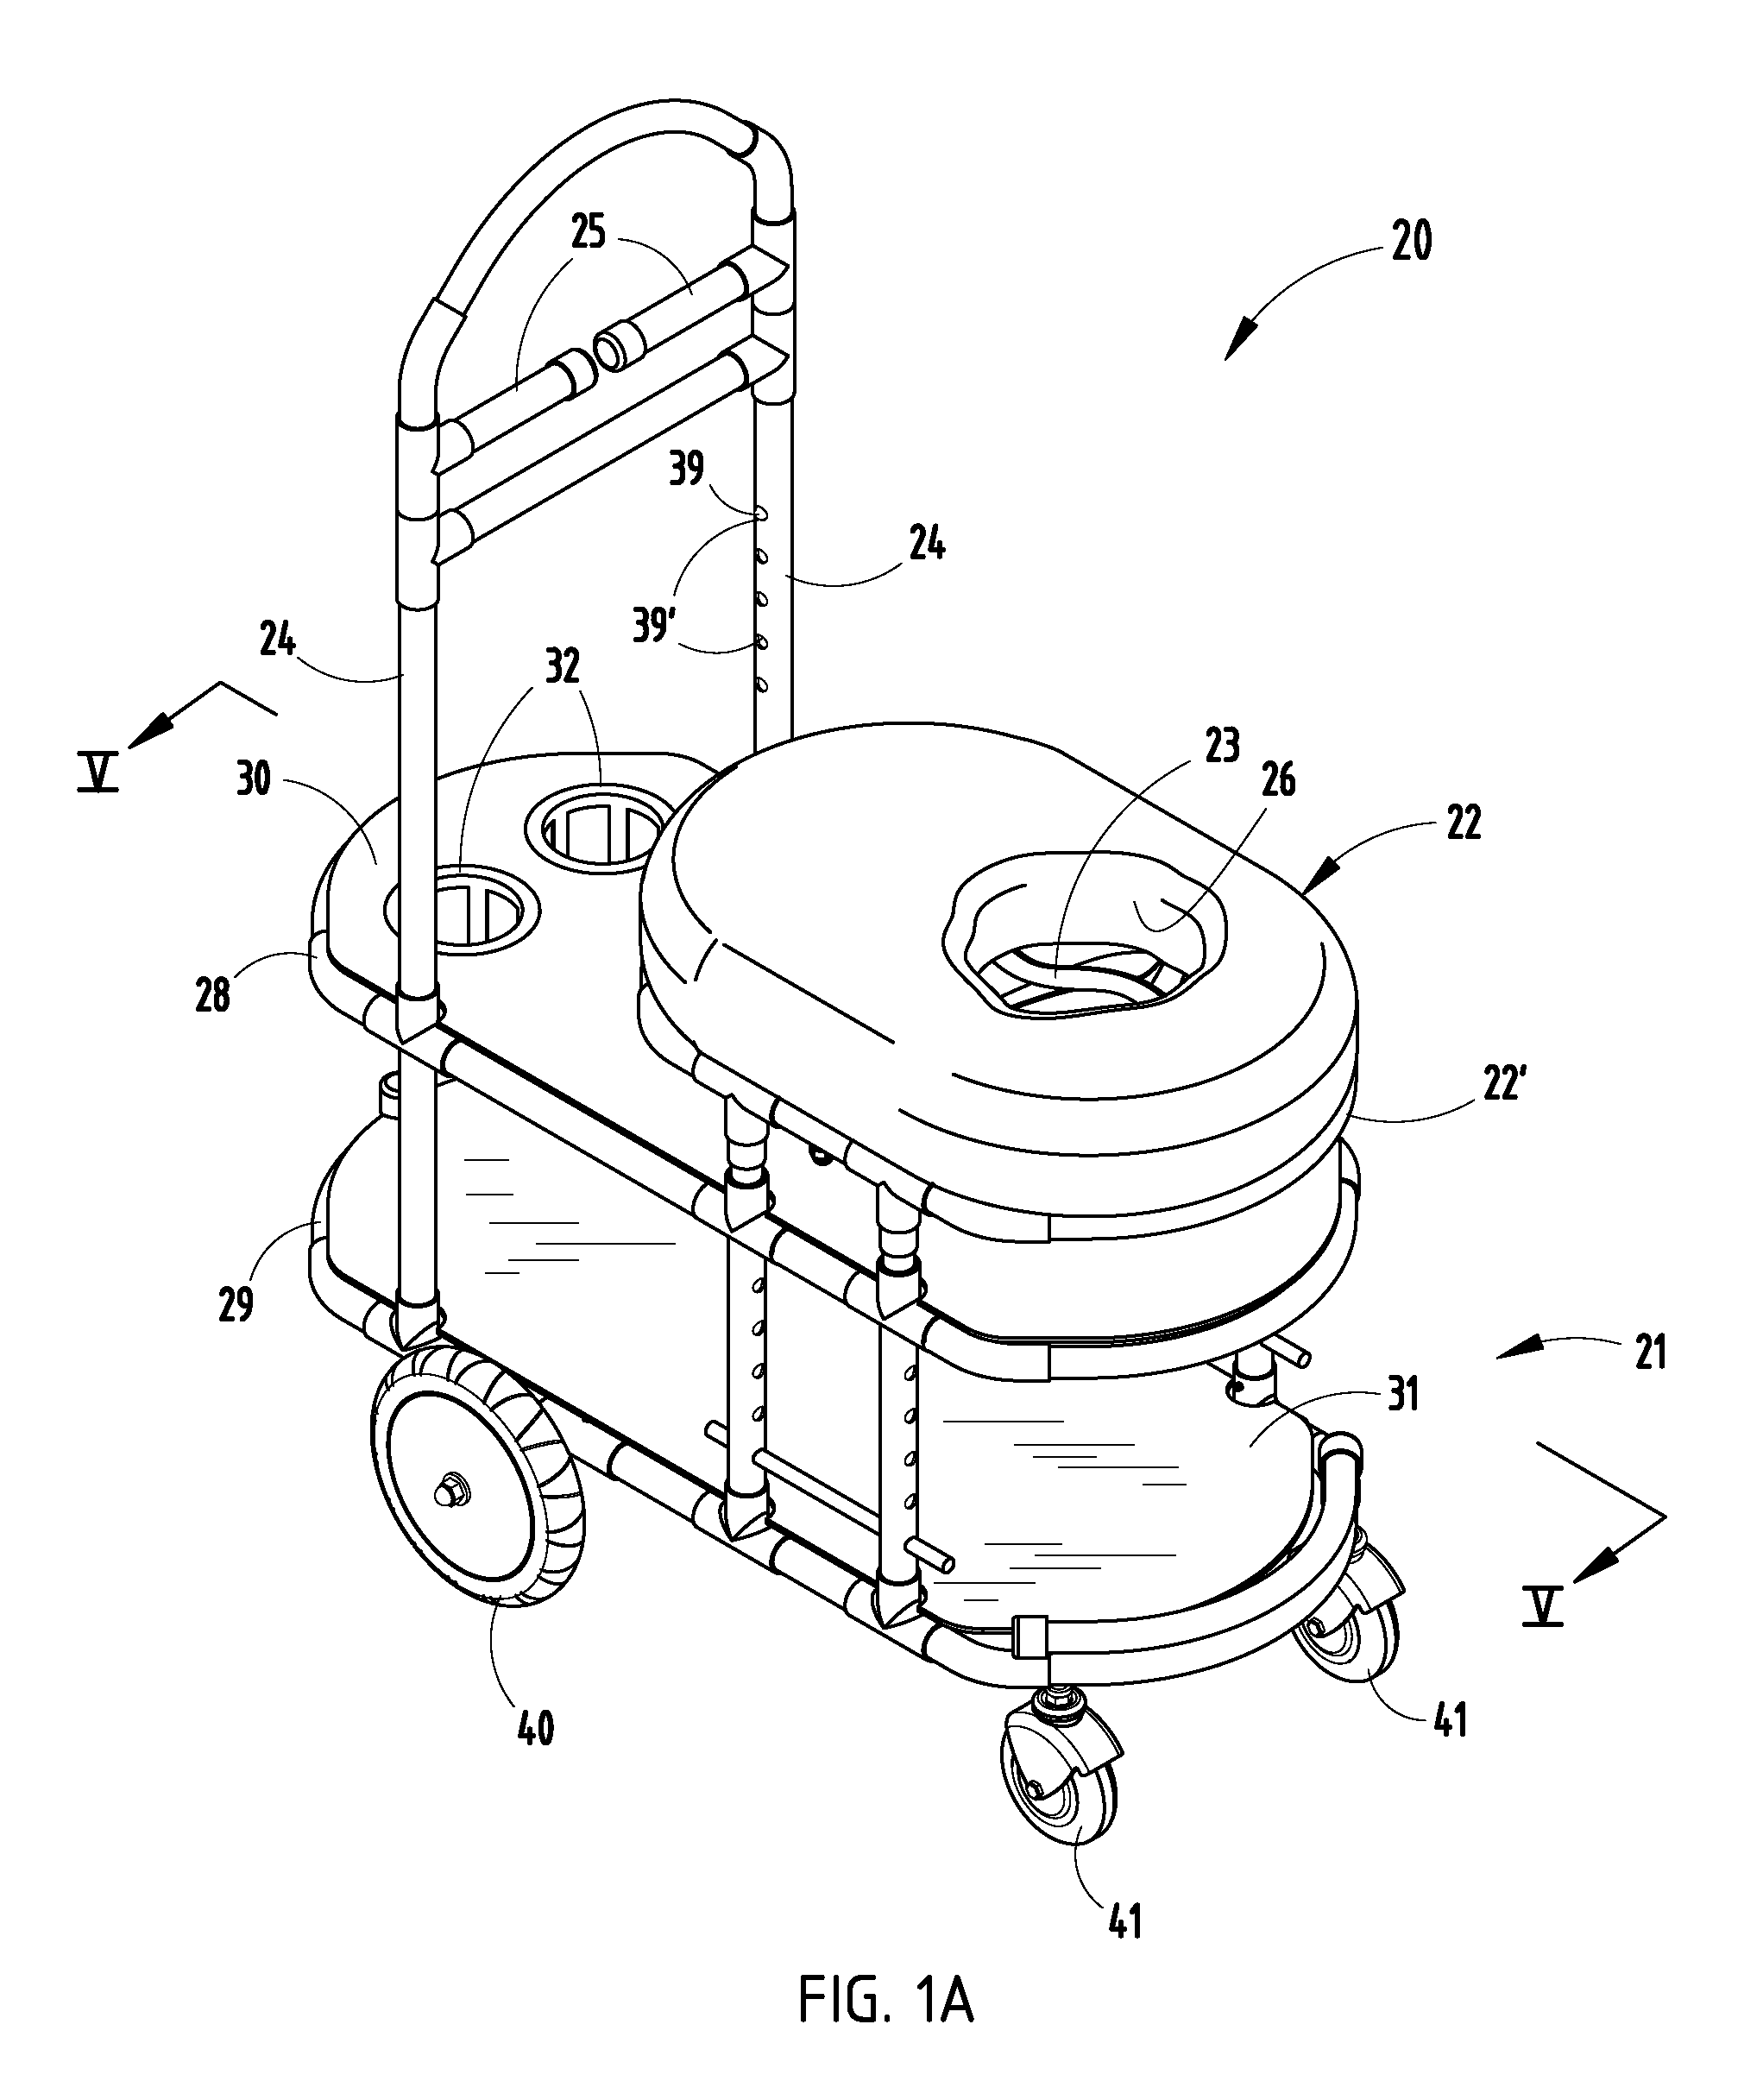 Mobility device for amputee and leg-injured persons